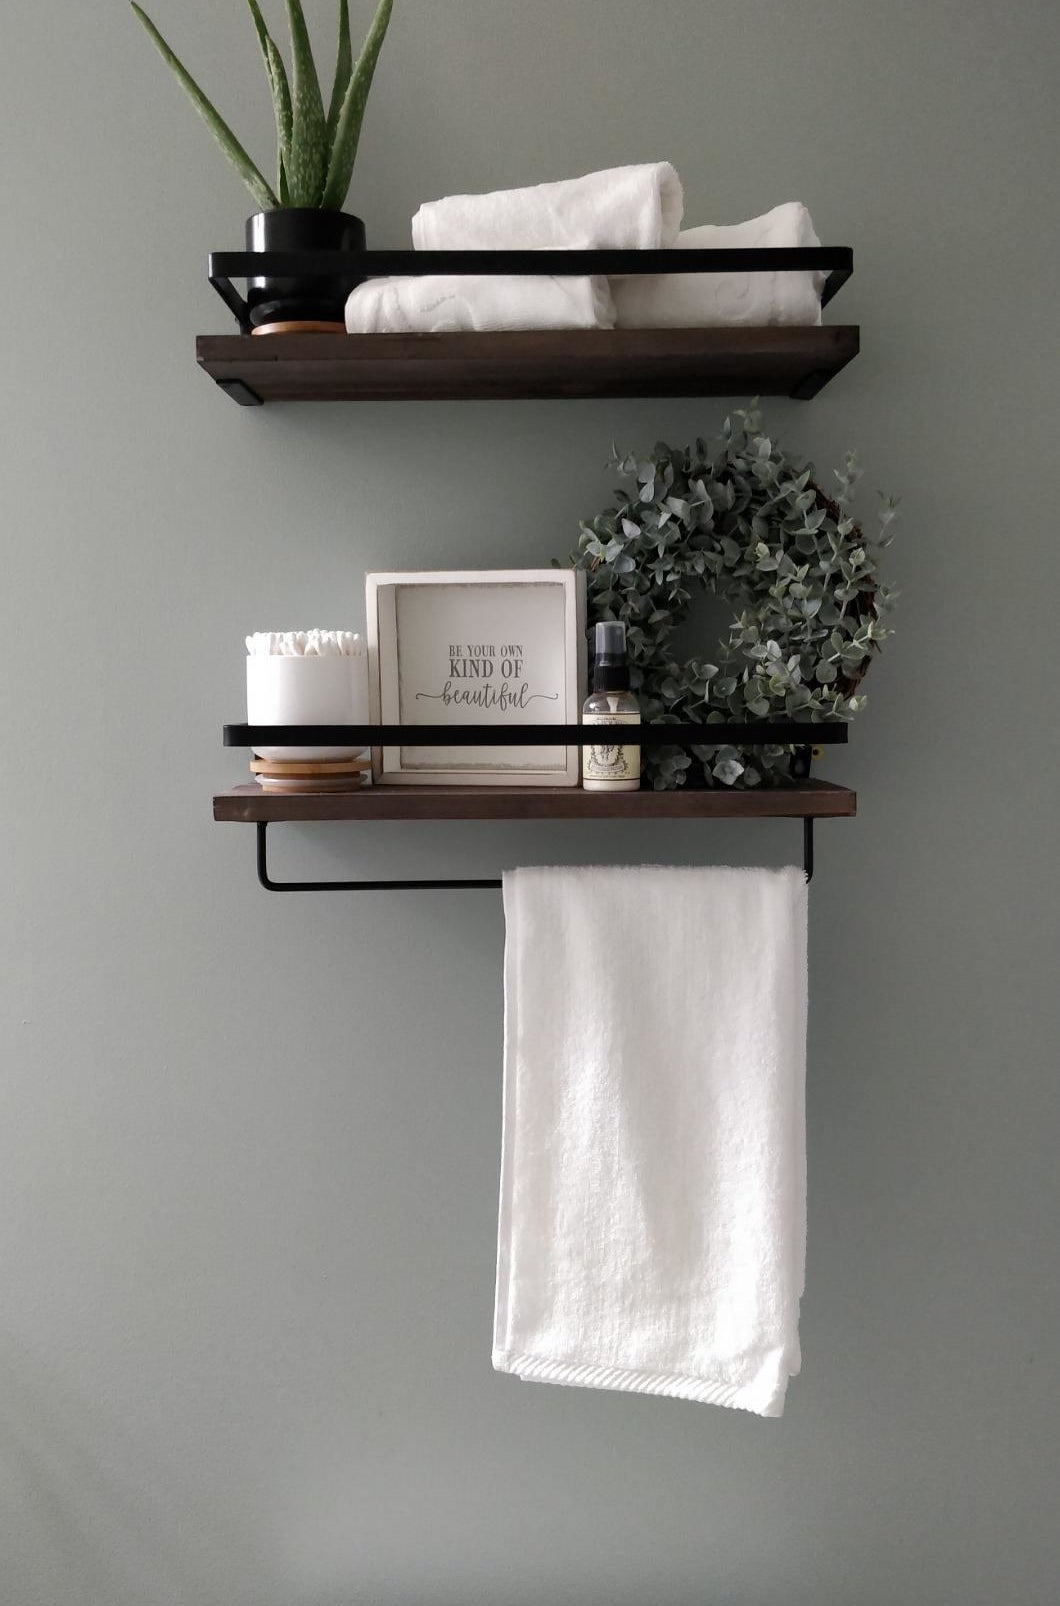 Reviewer pic of the two hanging shelves on the wall with towels and other bathroom items on them